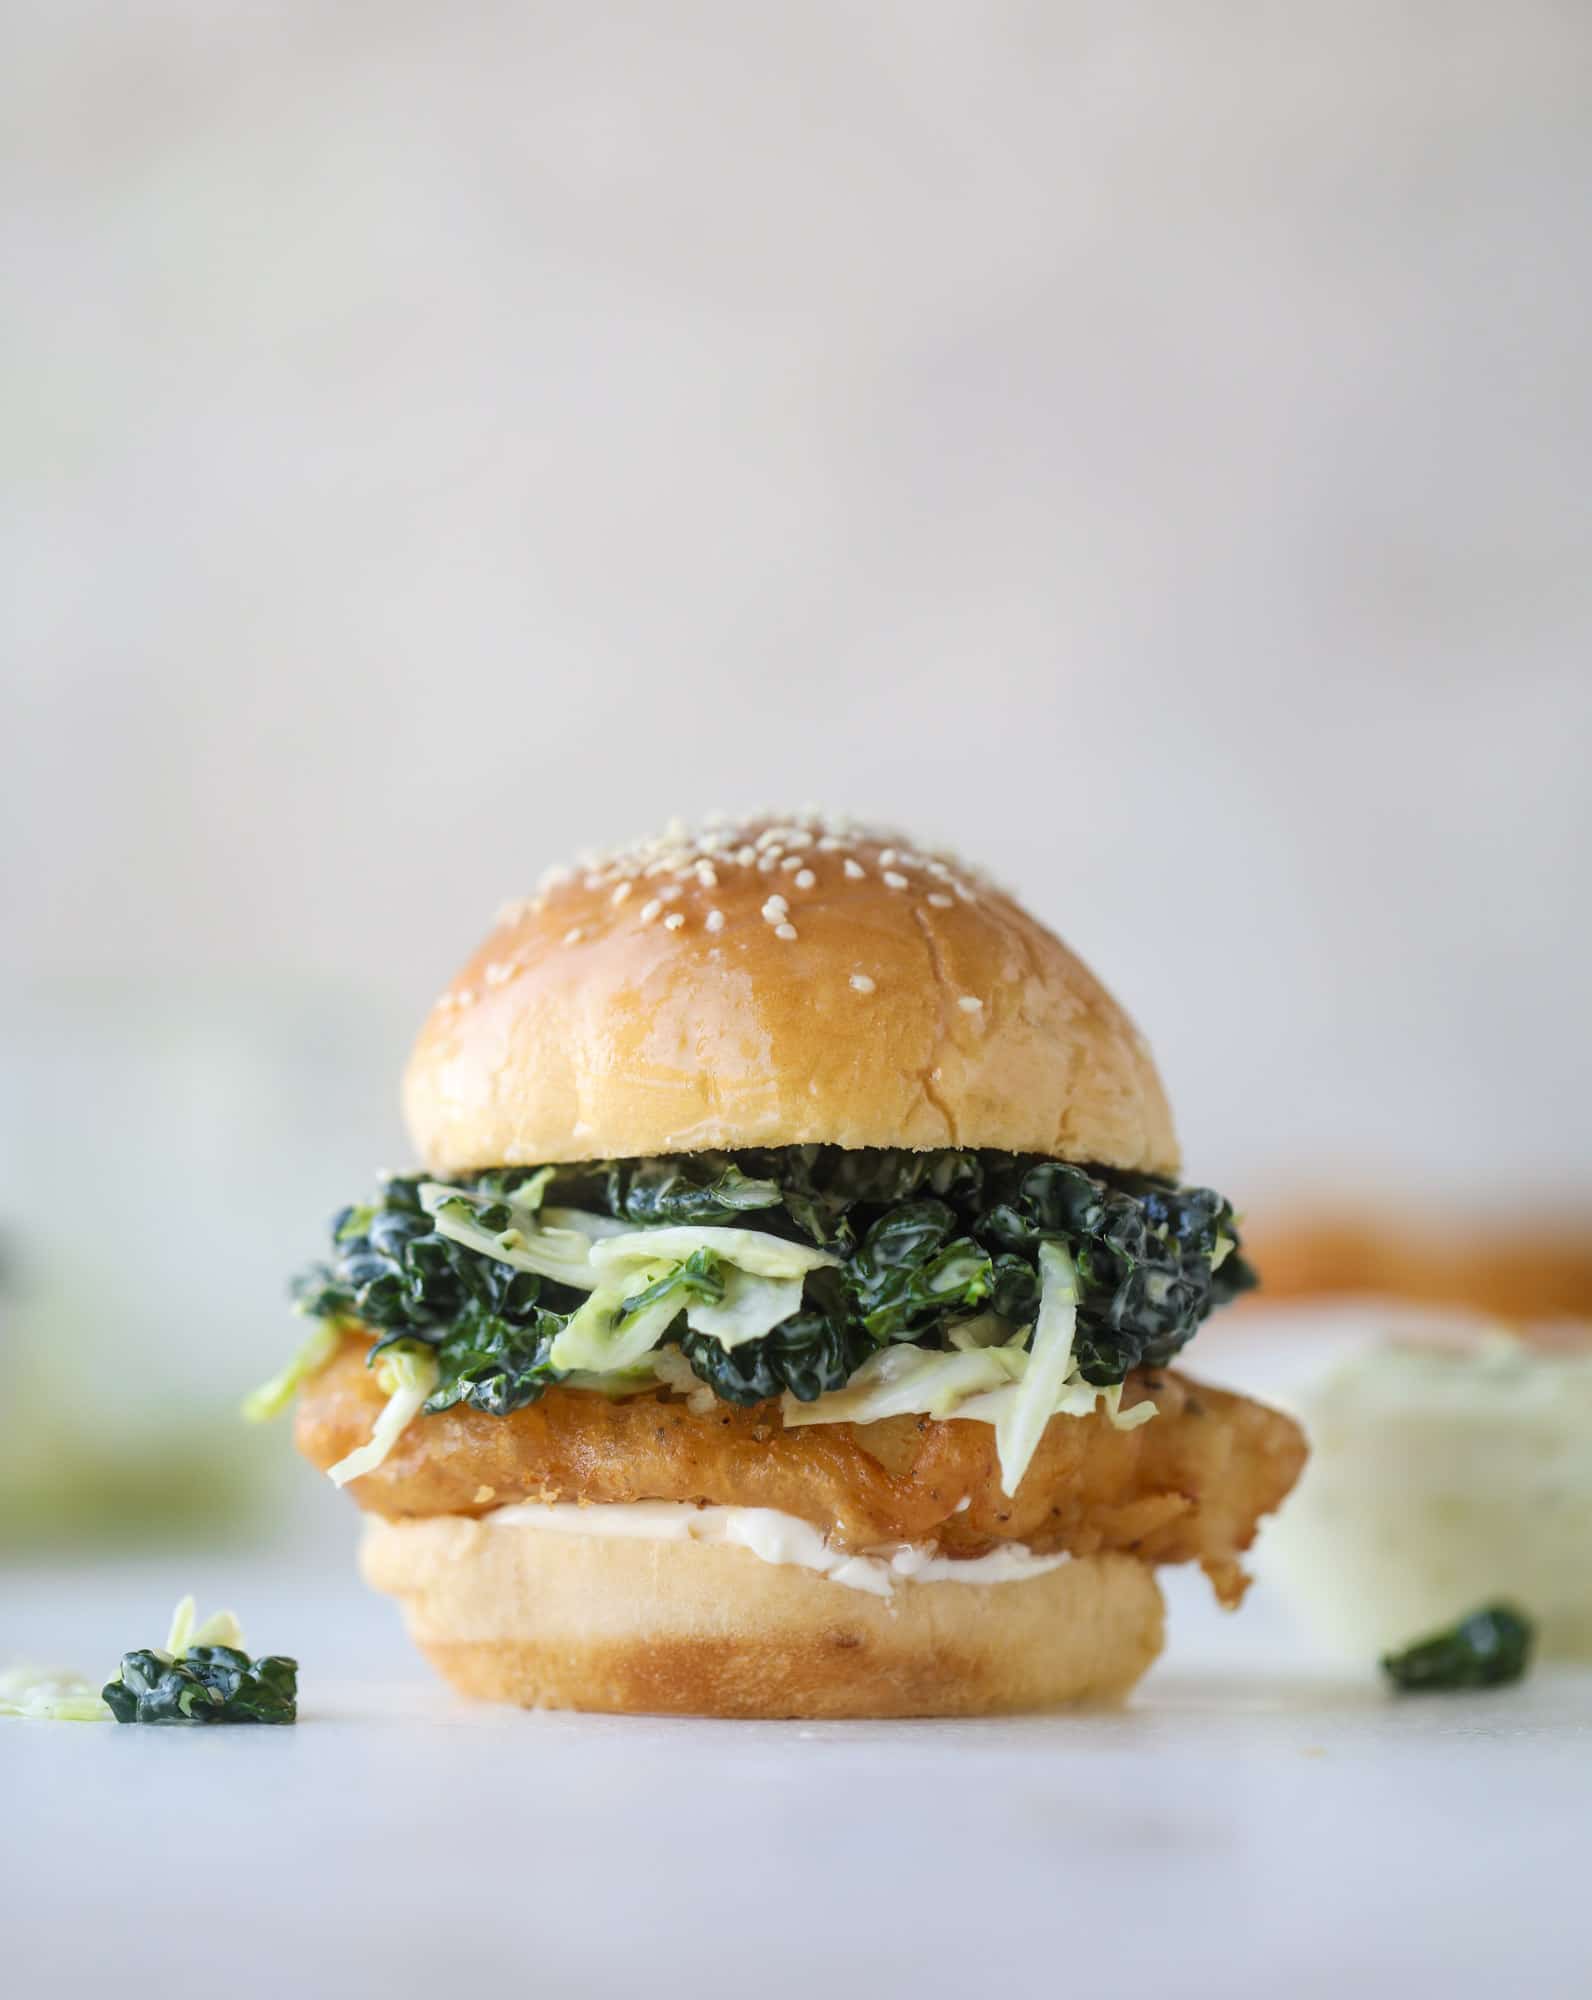 A light and crispy fish sandwich made with a simple beer batter and topped with a hearty, creamy kale cole slaw. Loaded with flavor! I howsweeteats.com #crispyfish #sandwich